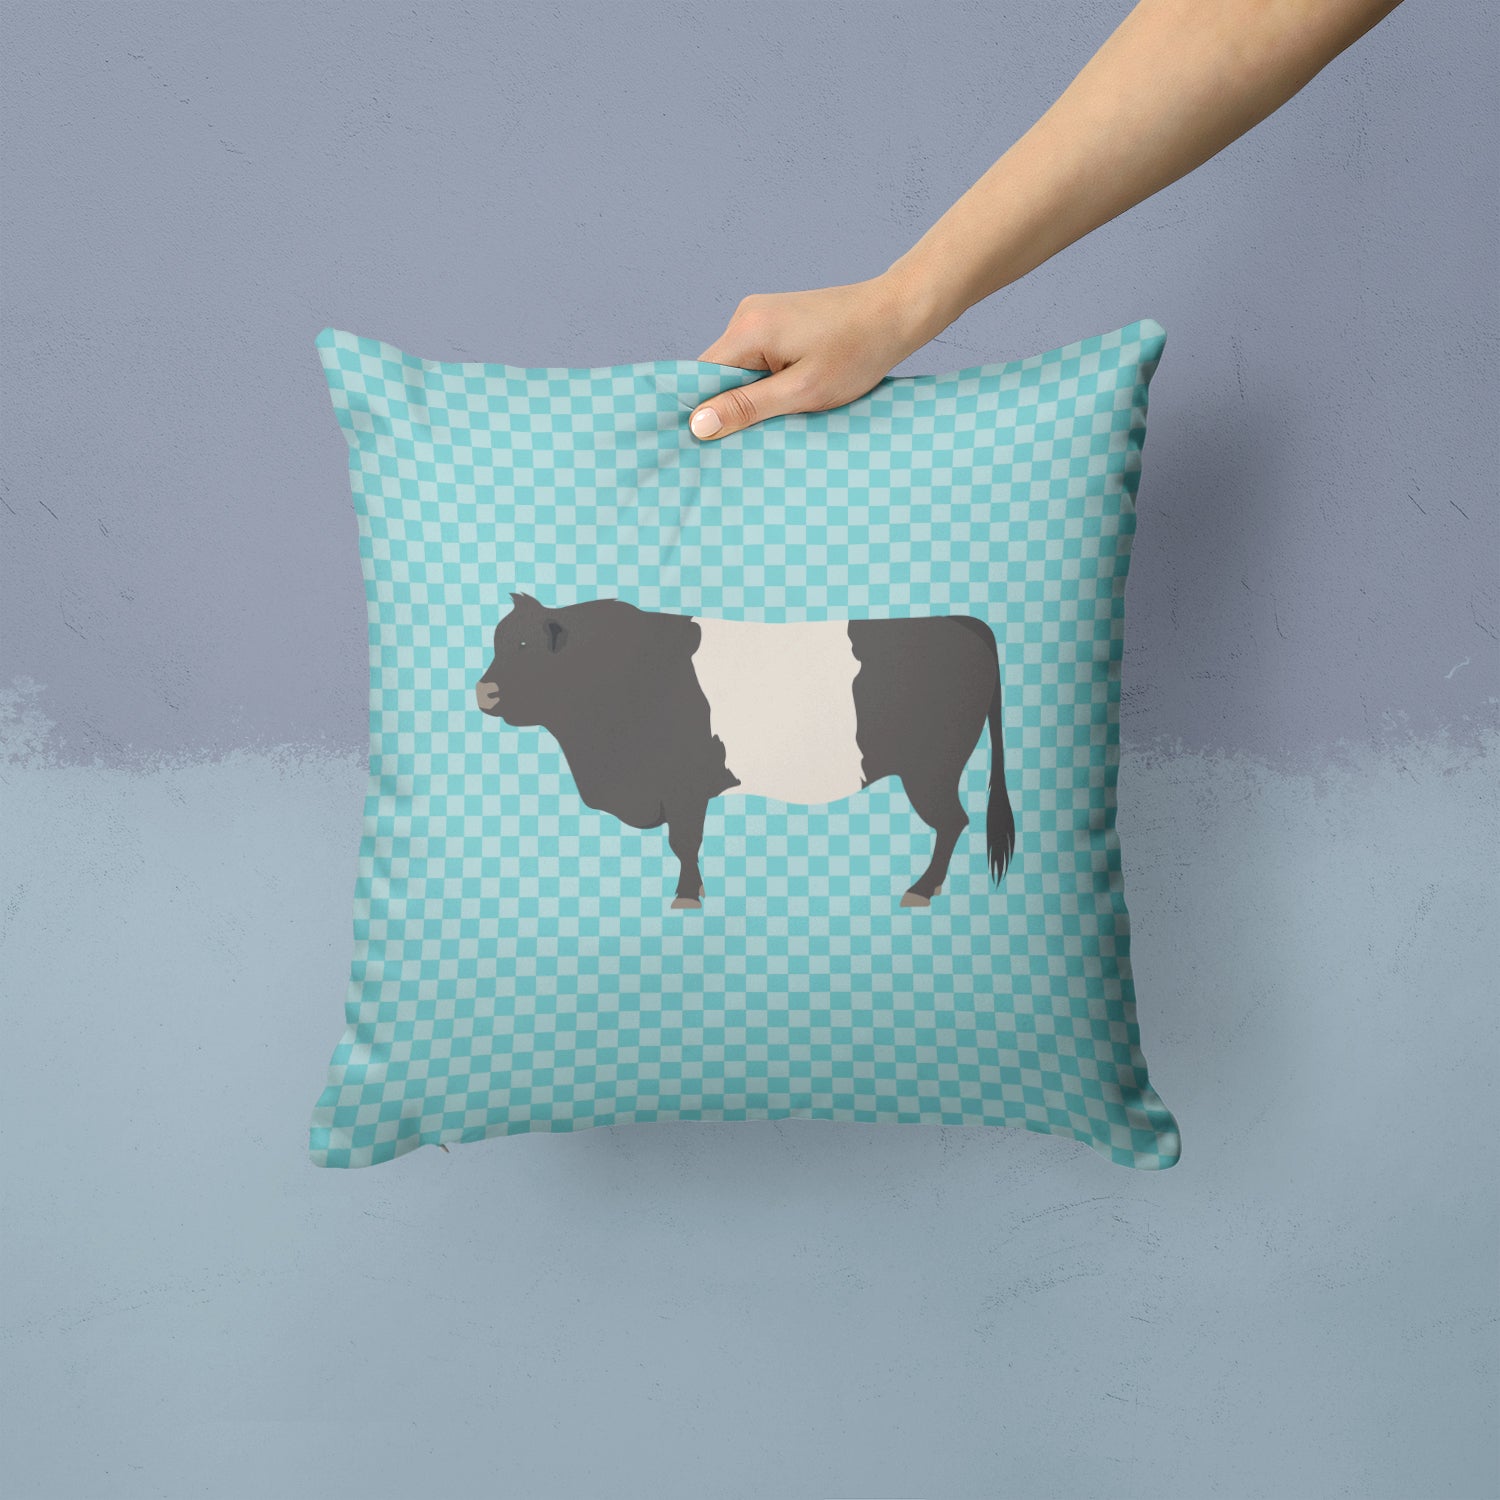 Belted Galloway Cow Blue Check Fabric Decorative Pillow BB8005PW1414 - the-store.com